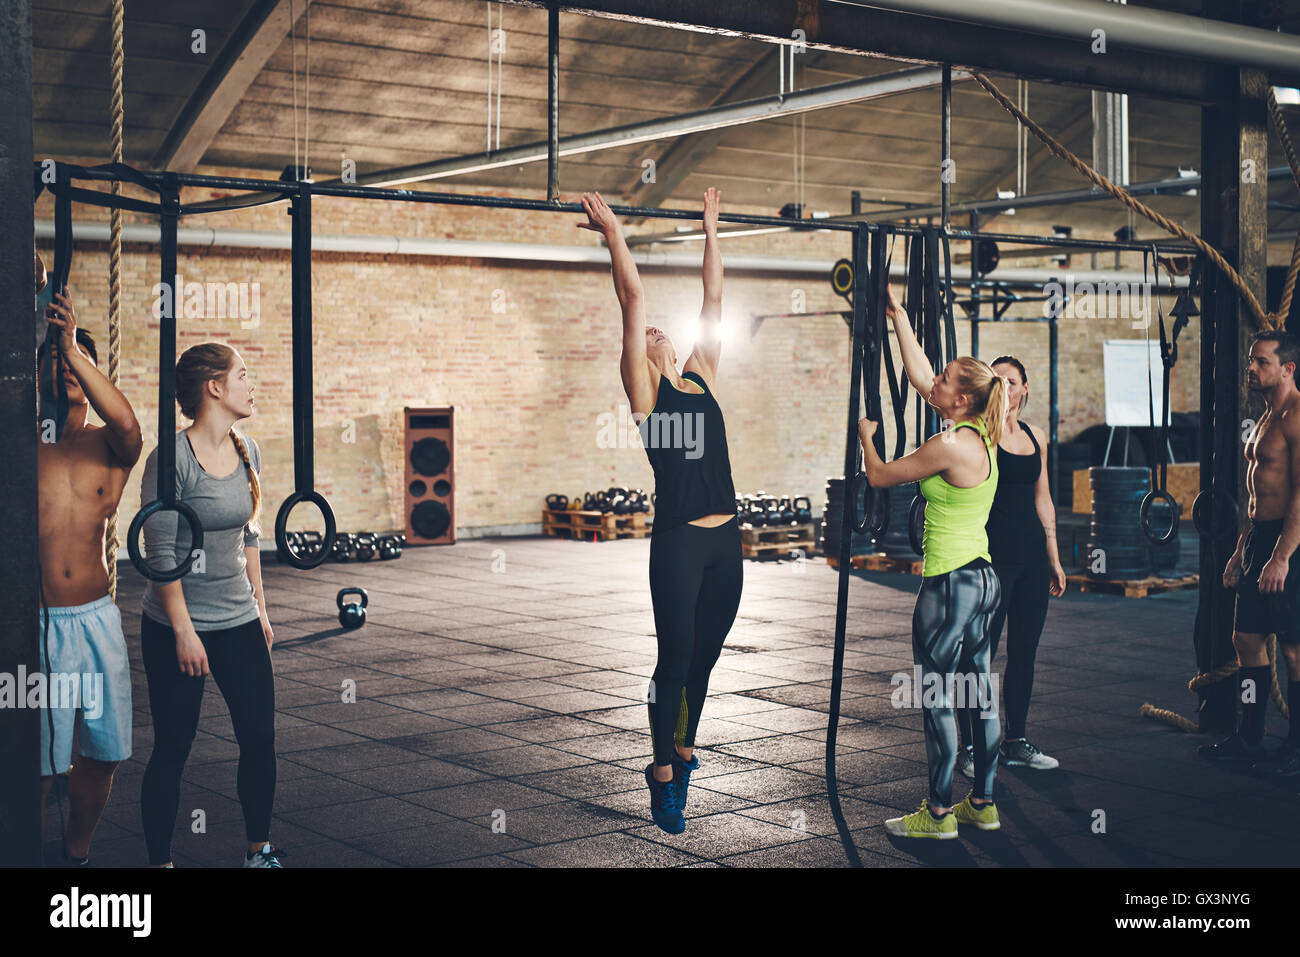 Fitness people doing cross training in gym stock photo (126711